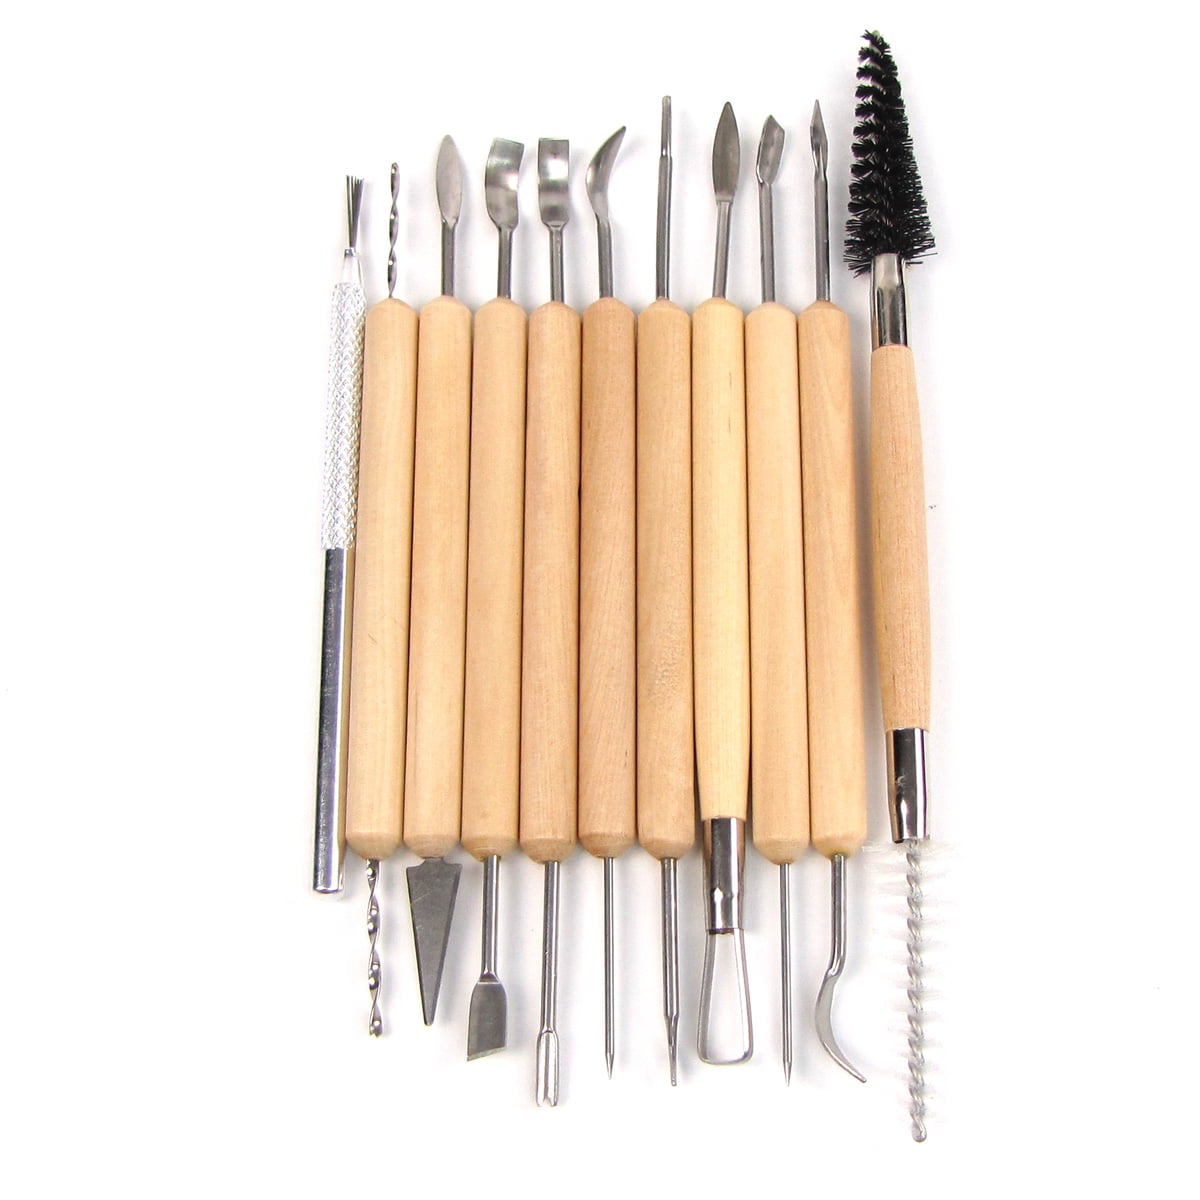 8Pcs Stainless Steel Pottery Wax Clay Carvers Carving Sculpture Hand Tools 